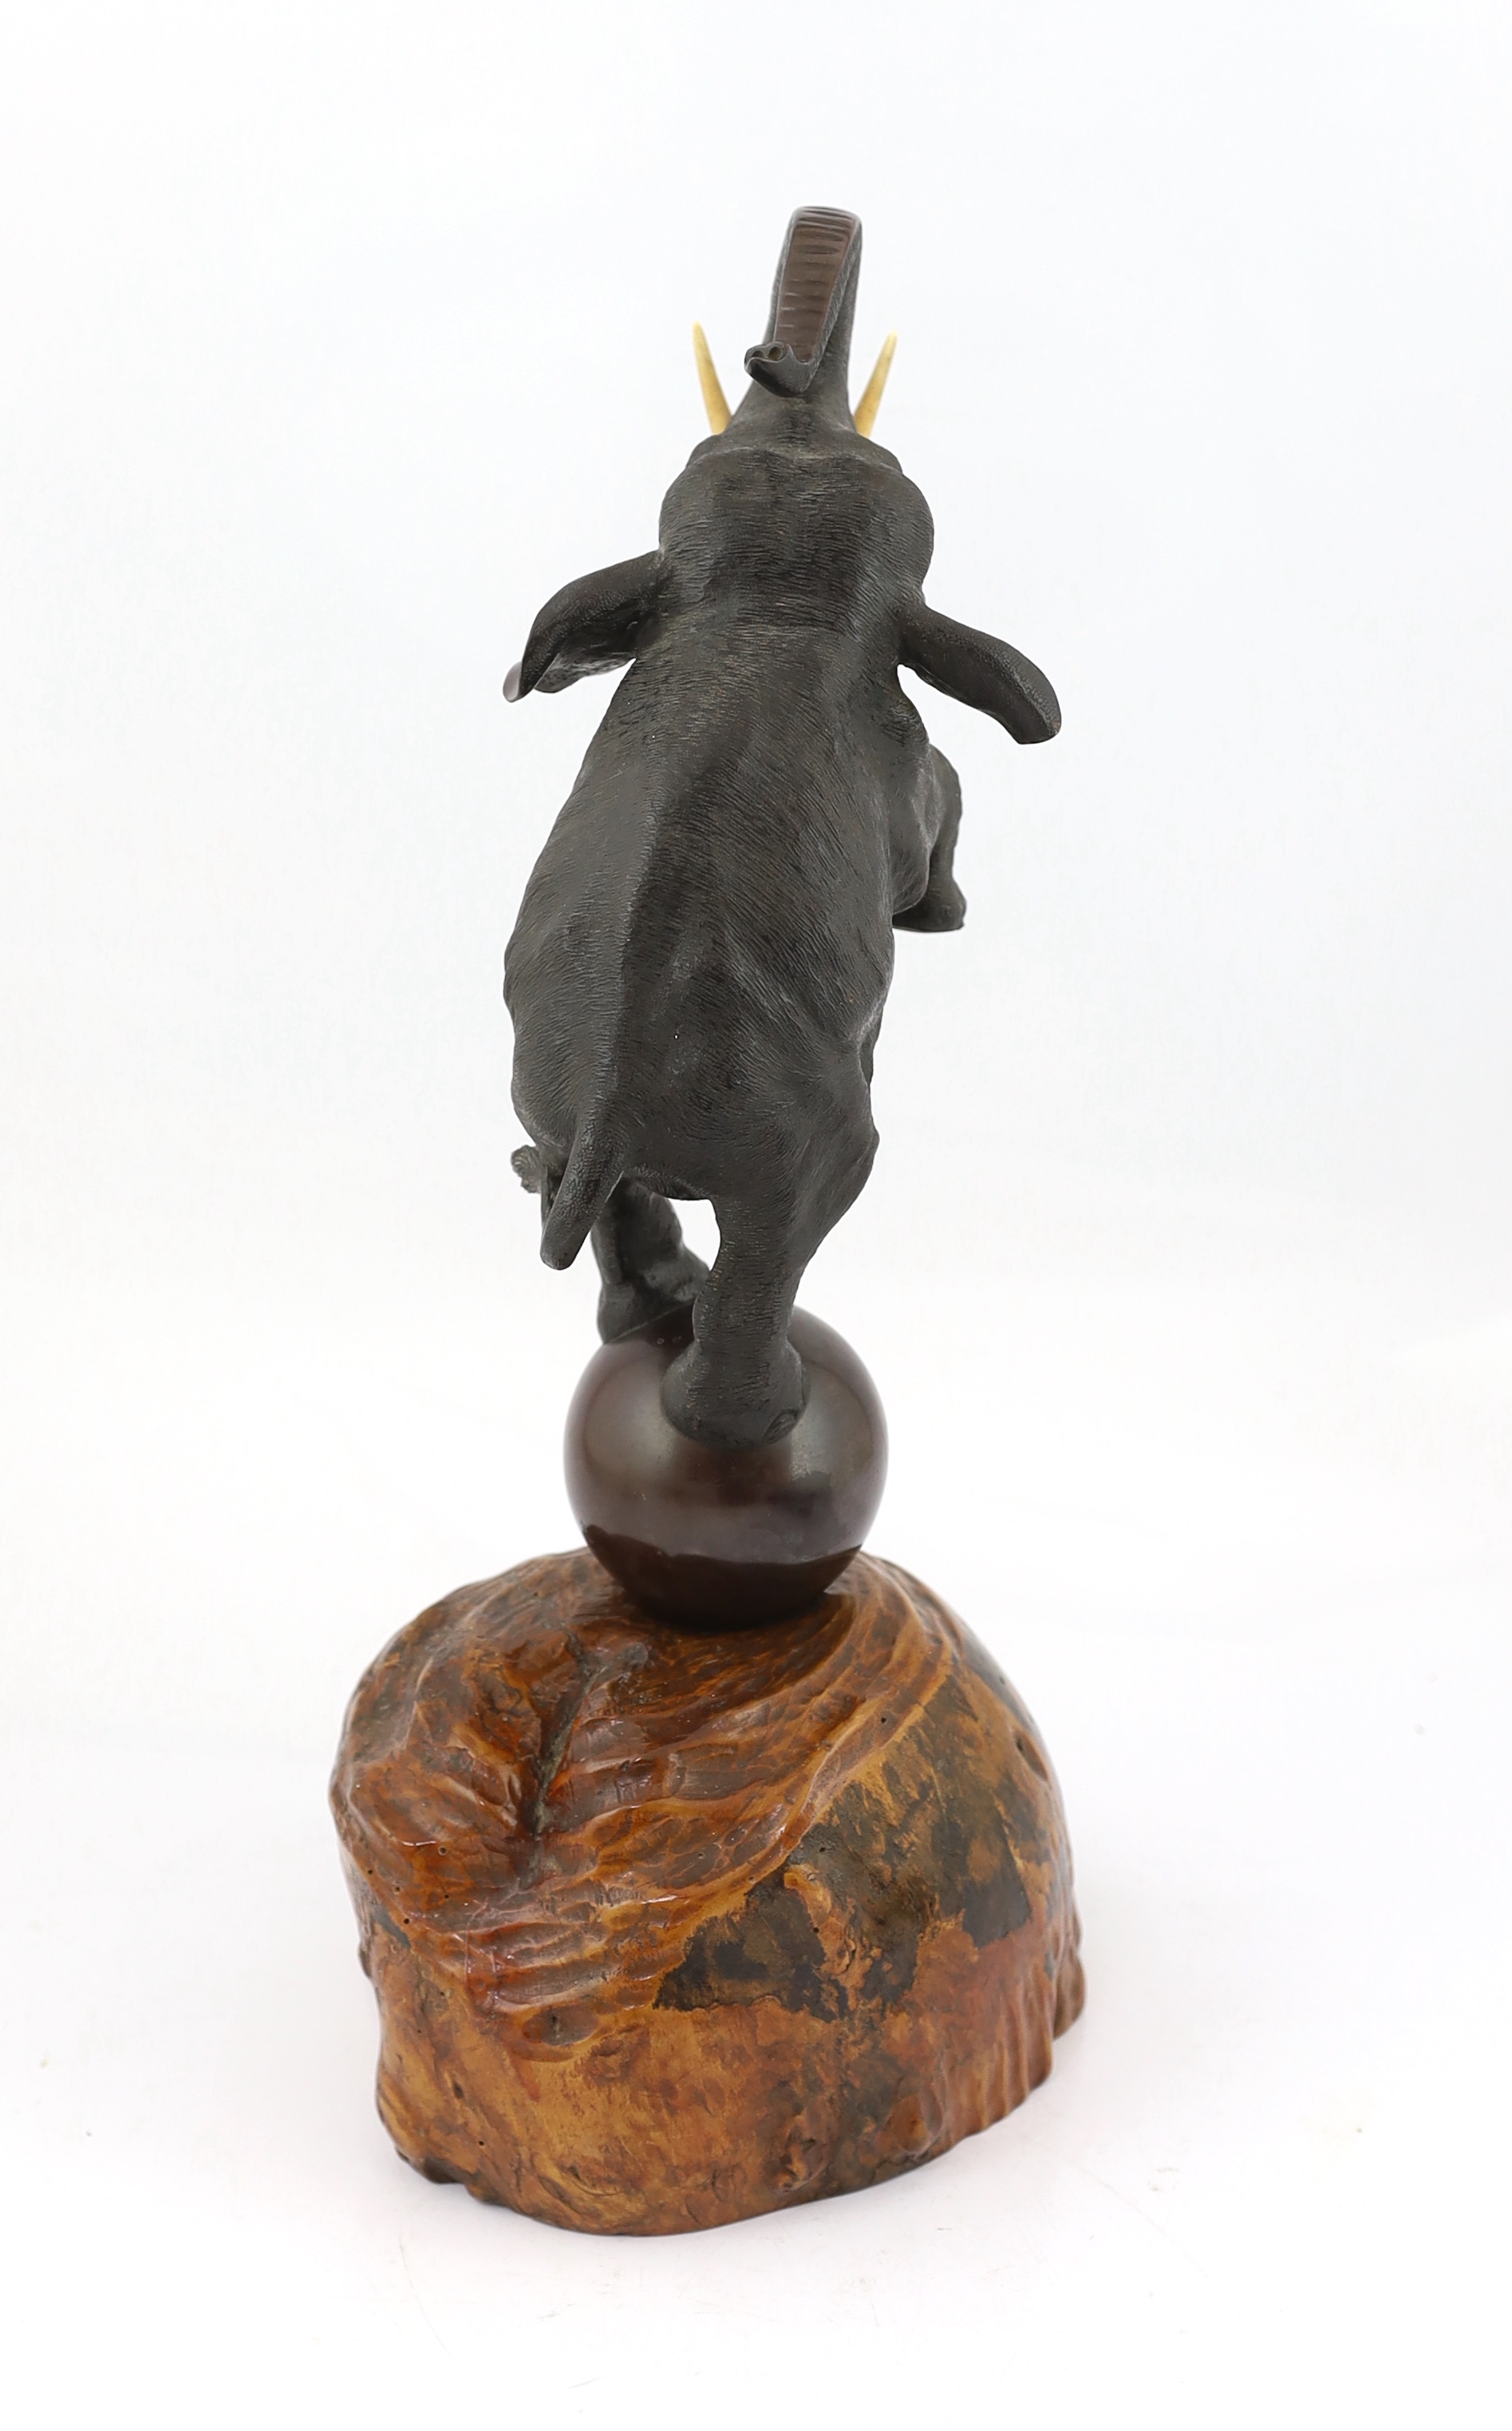 A Japanese bronze model of a rearing elephant standing on a ball, Meiji period